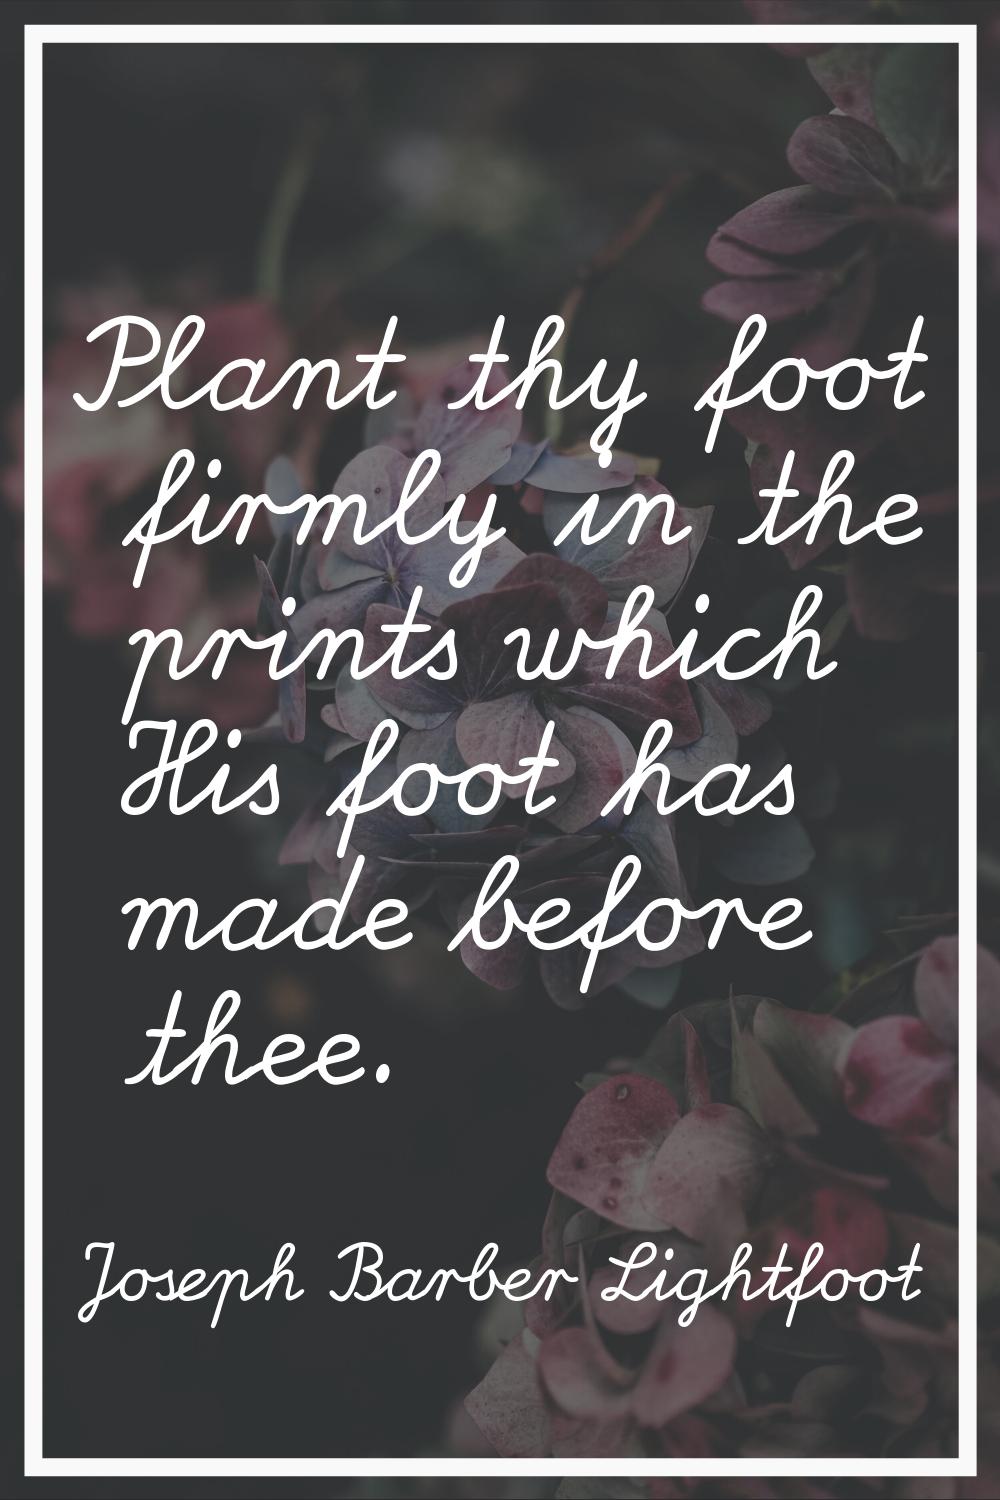 Plant thy foot firmly in the prints which His foot has made before thee.